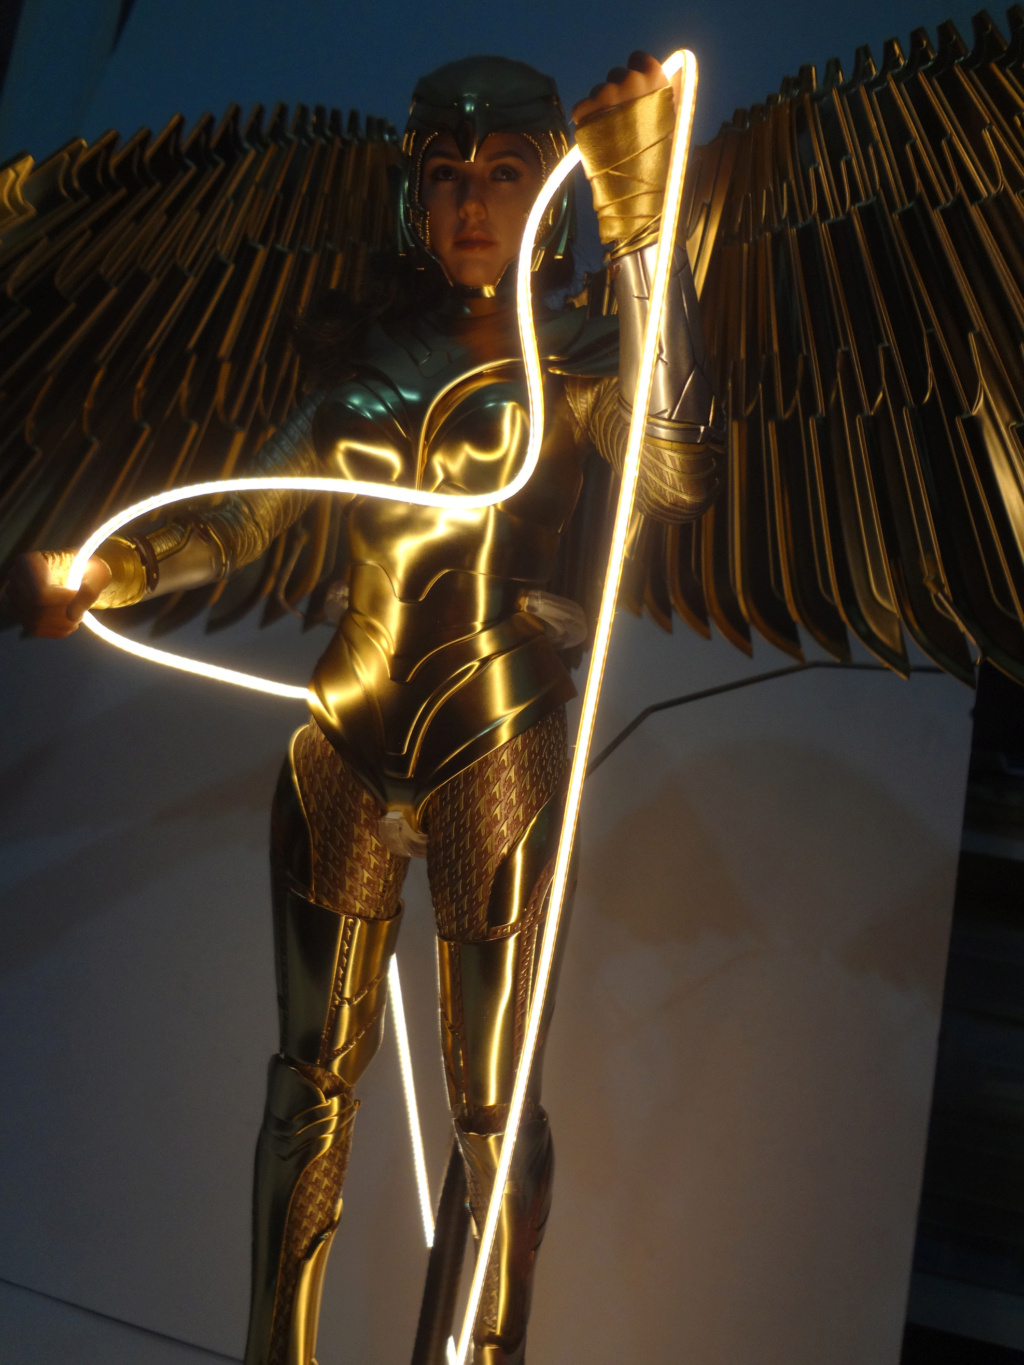 hottoys - NEW PRODUCT: HOT TOYS: WONDER WOMAN 1984: GOLDEN ARMOR WONDER WOMAN 1/6TH SCALE COLLECTIBLE FIGURE (Standard & Deluxe Versions) - Page 2 Dsc04217